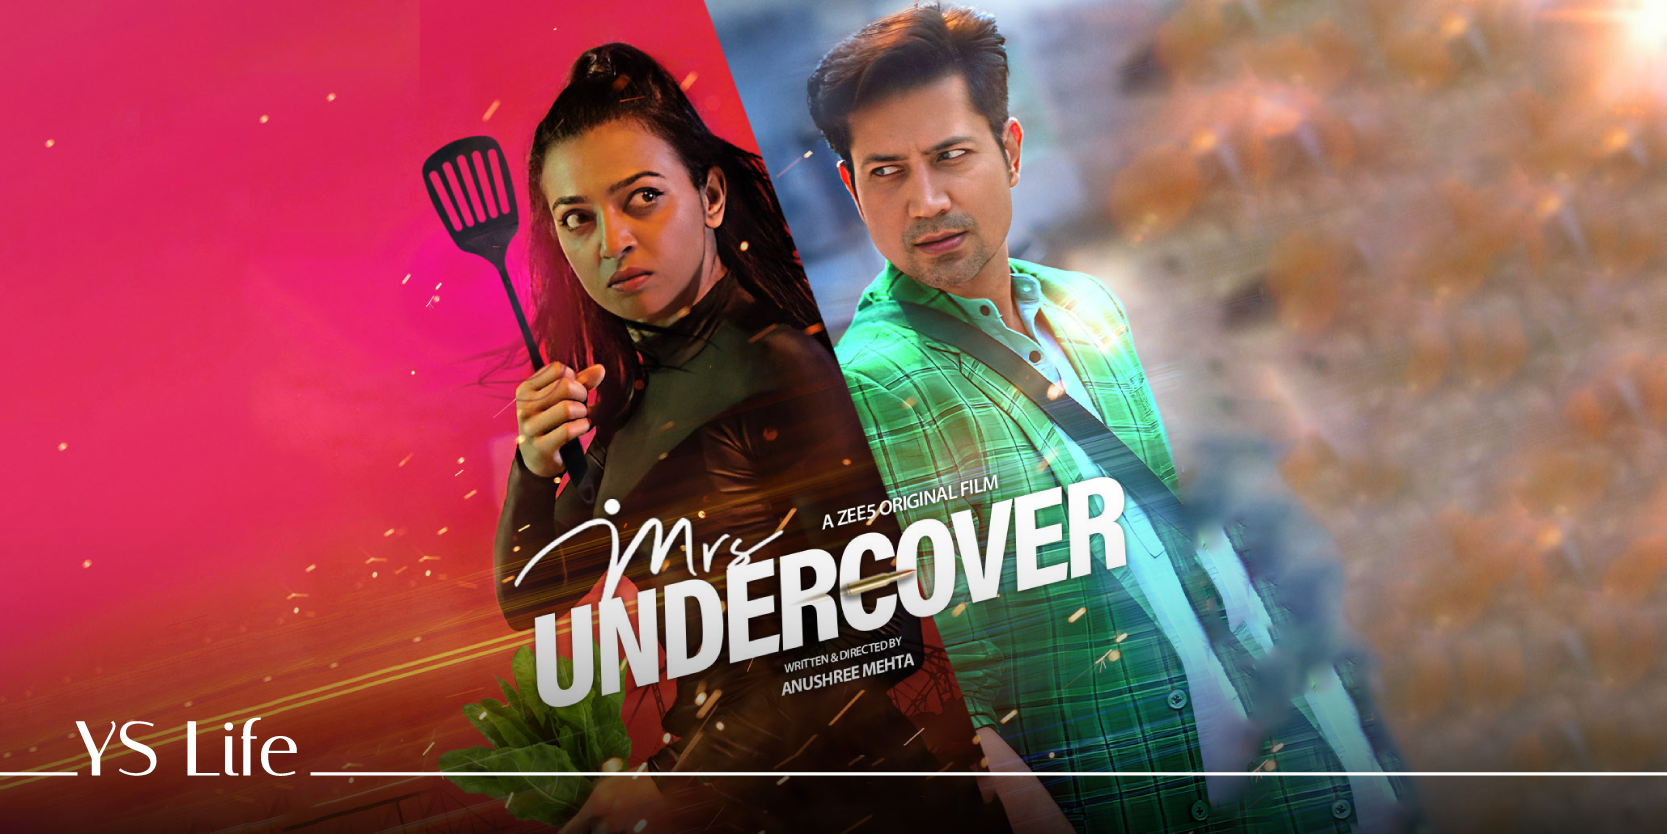 Even Radhika Apte can’t save the haphazardly executed Mrs Undercover 